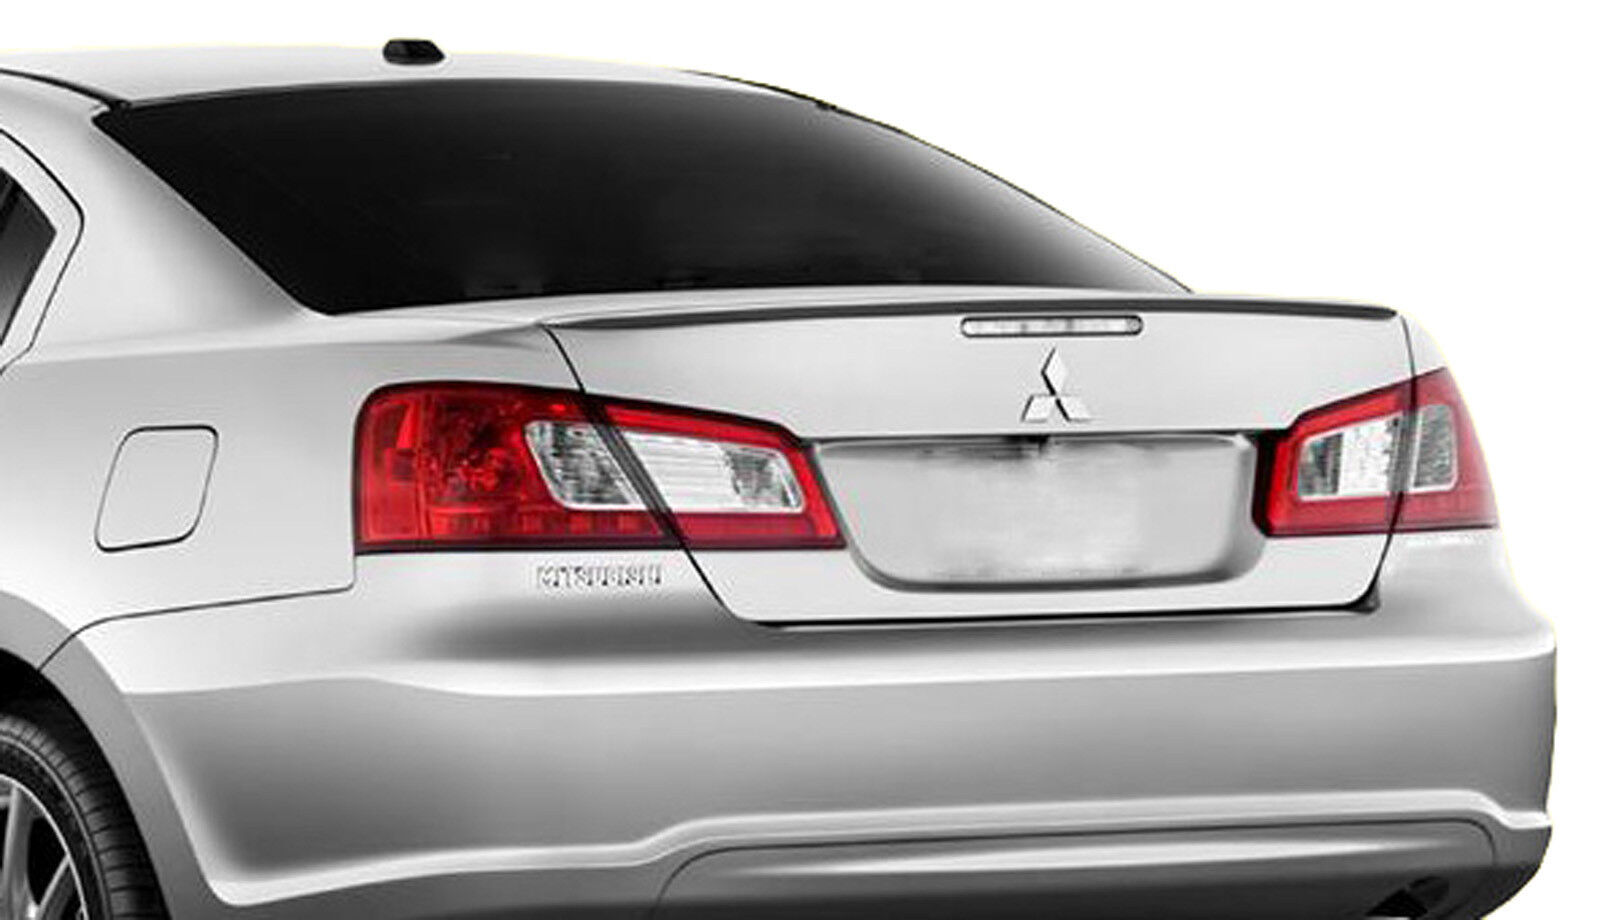 UNPAINTED PRIMED FACTORY STYLE LIP SPOILER FOR A MITSUBISHI GALANT 2009-2012  | eBay